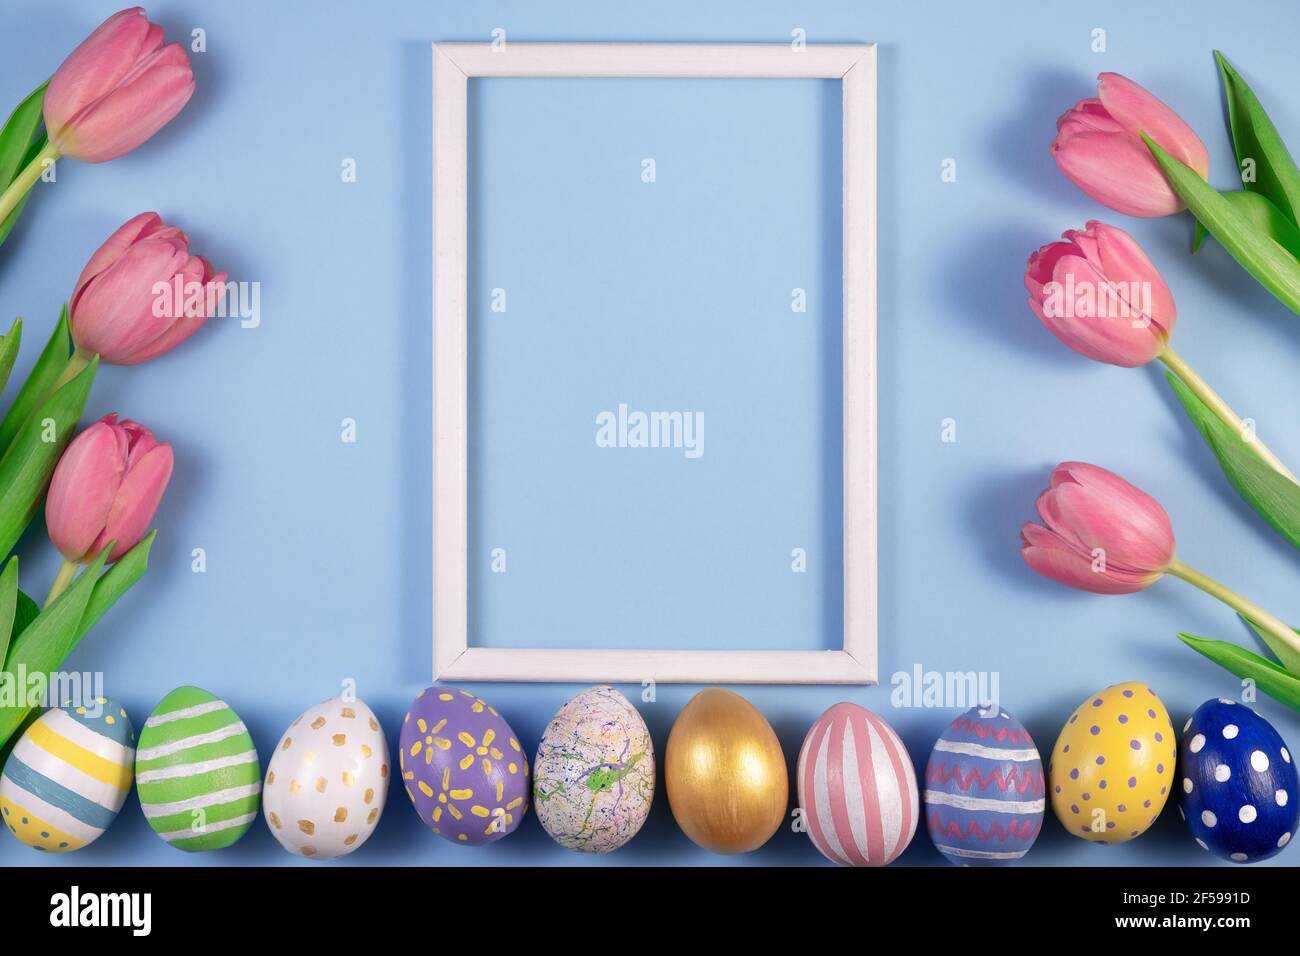 Tulips flowers and Easter eggs with wooden frame on blue background. Card for Happy Easter. Waiting for spring. Greeting card. Hello spring and easter Stock Photo